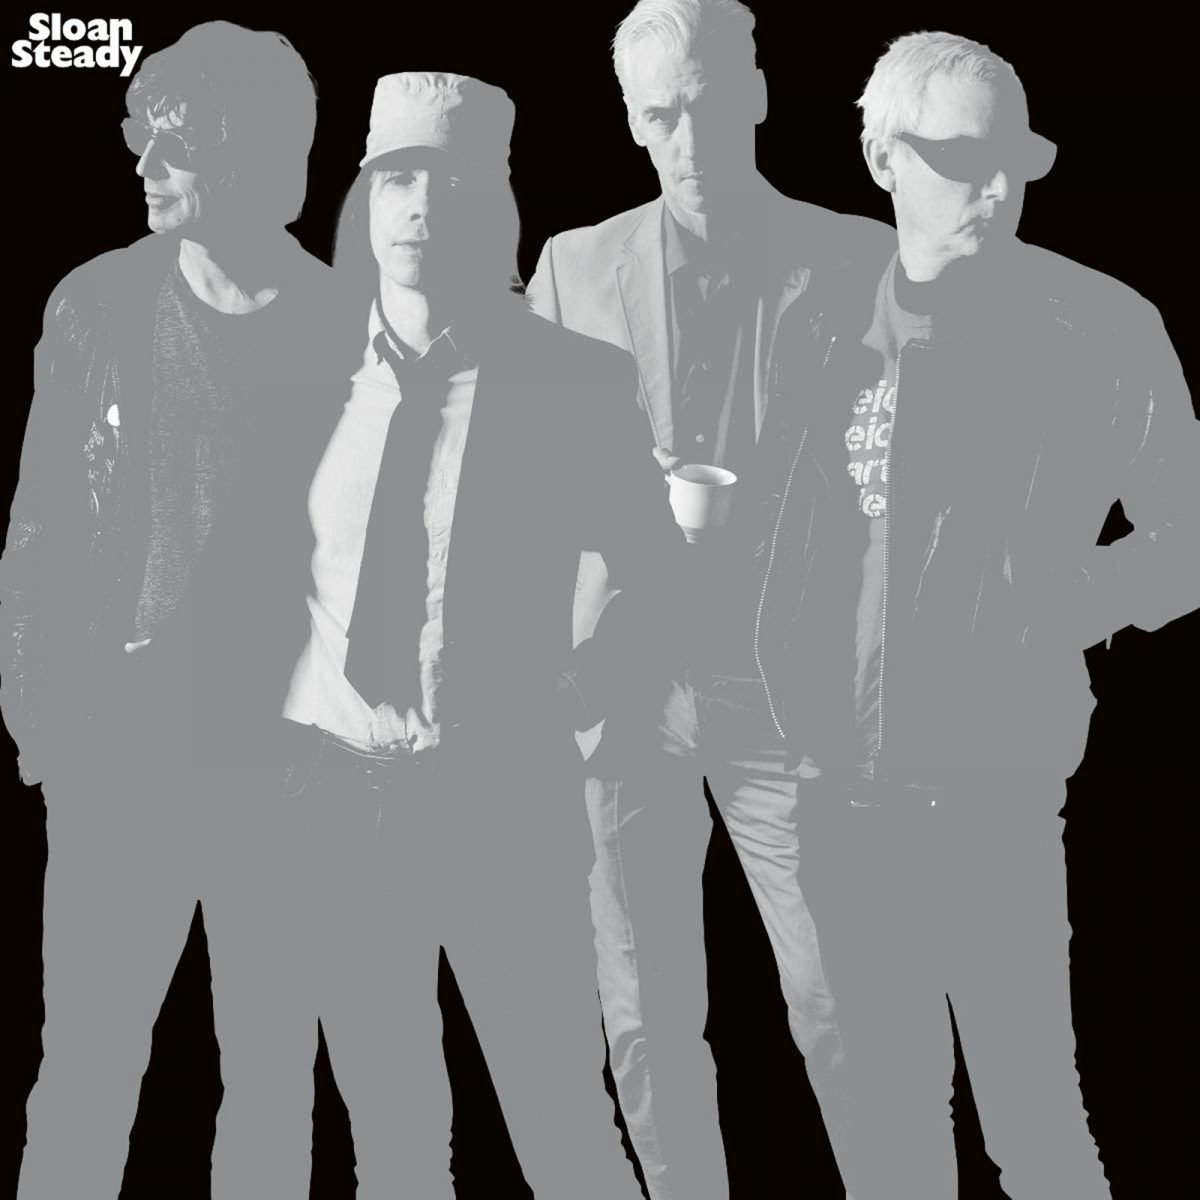 Canadian indie-rock royalty Sloan releases their remarkable 13th studio album ‘Steady’